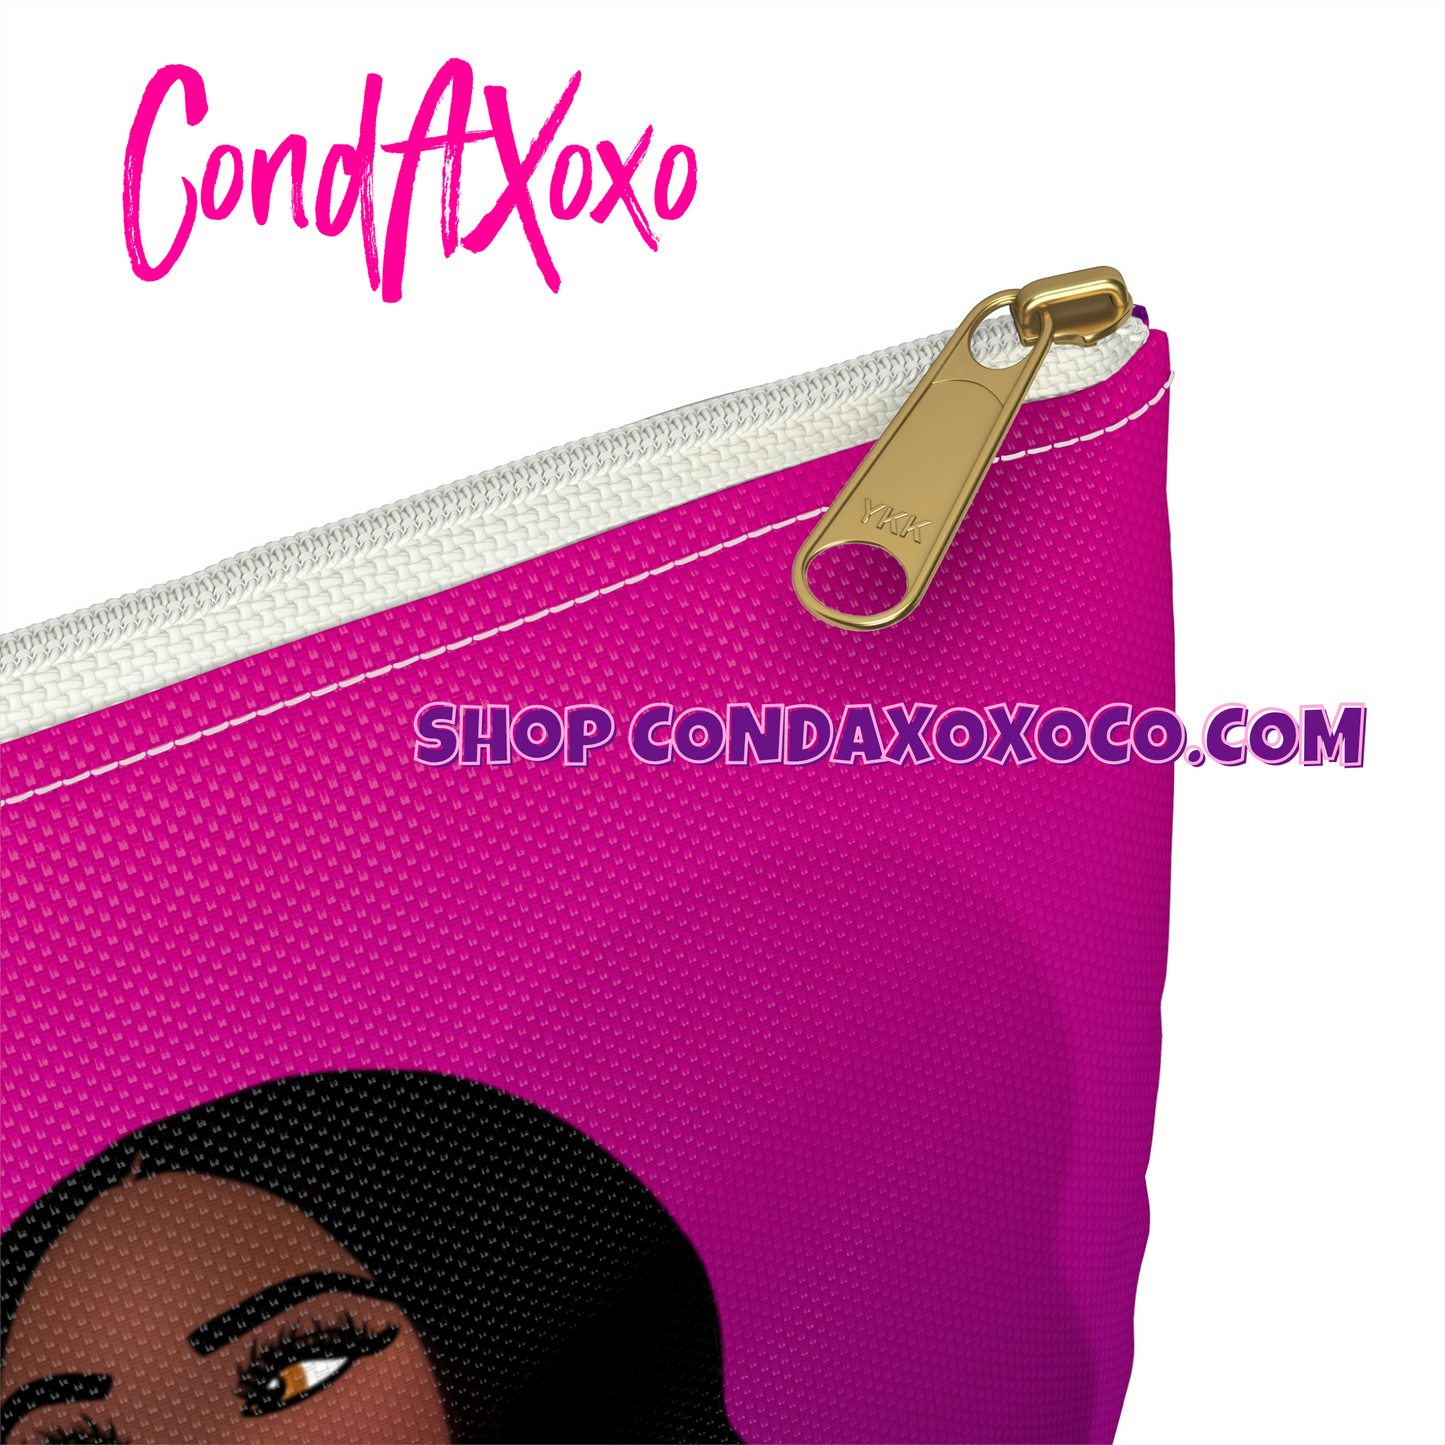 "Post Your Gawd Damn Sh*t" & "Boss Up" Affirmation (2 in 1 Design) Accessory Pouch | Xoxo Market